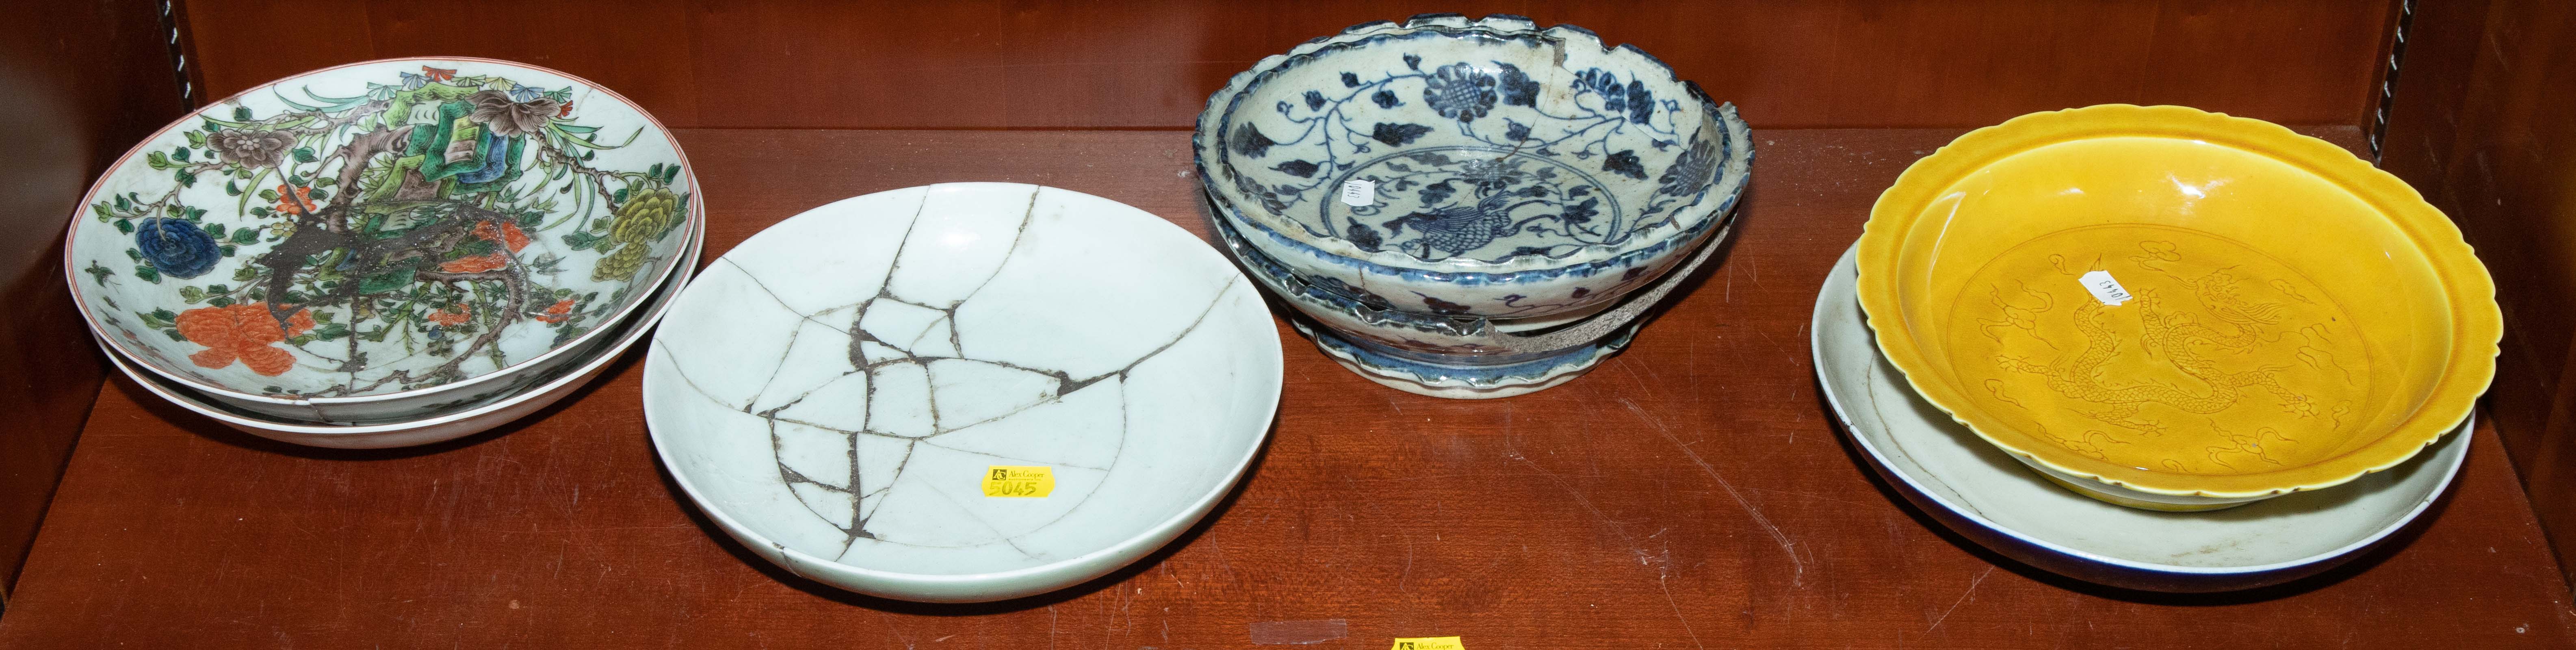 SELECTION OF CHINESE ANTIQUE STYLE PORCELAIN